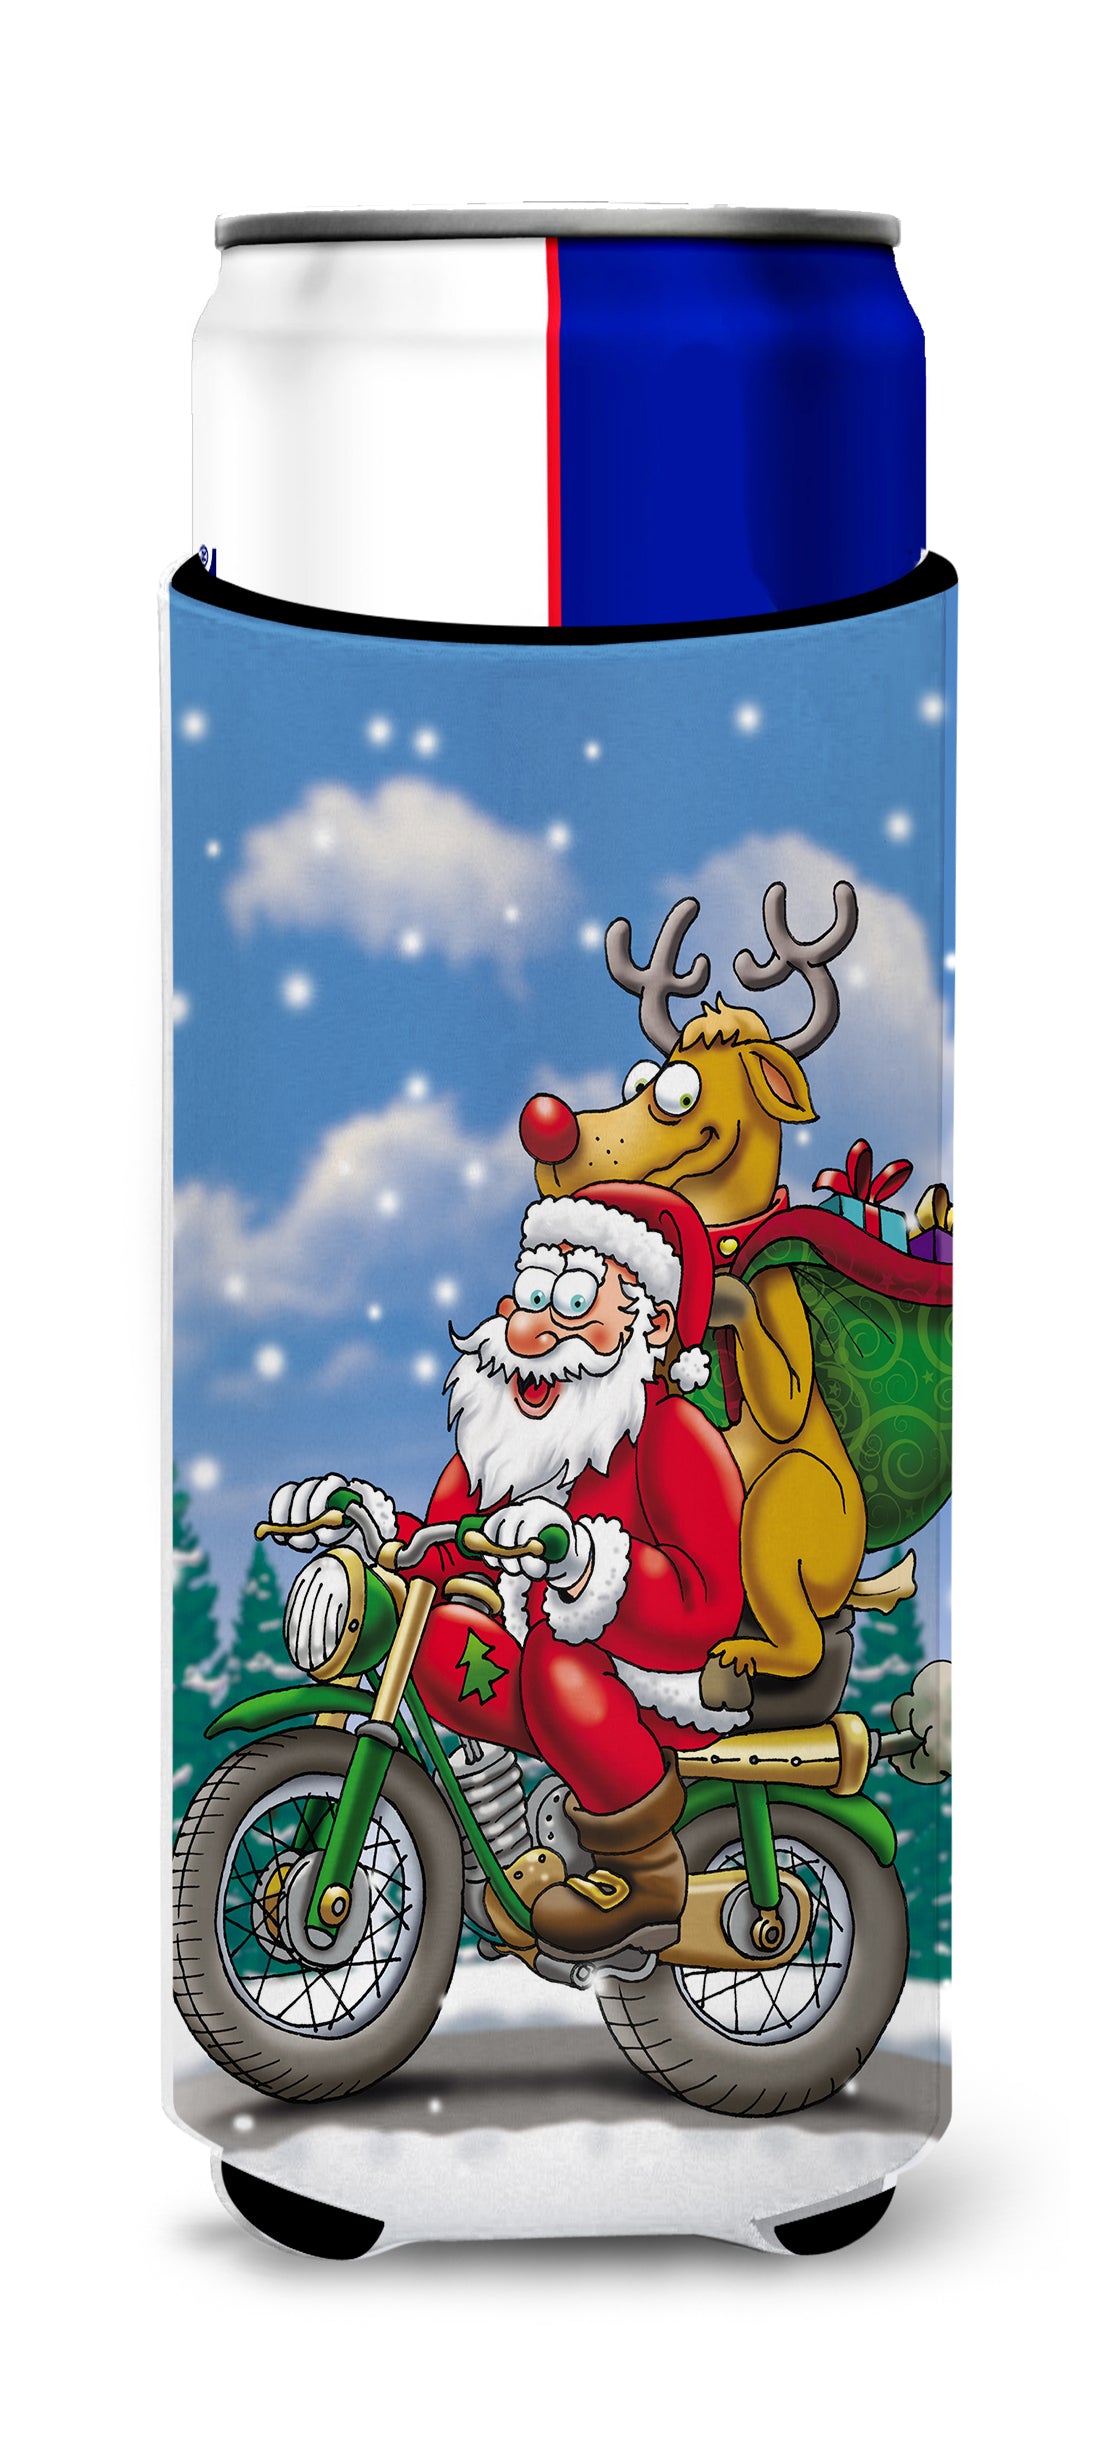 Christmas Santa Claus on a Motorcycle Ultra Beverage Insulators for slim cans APH8996MUK